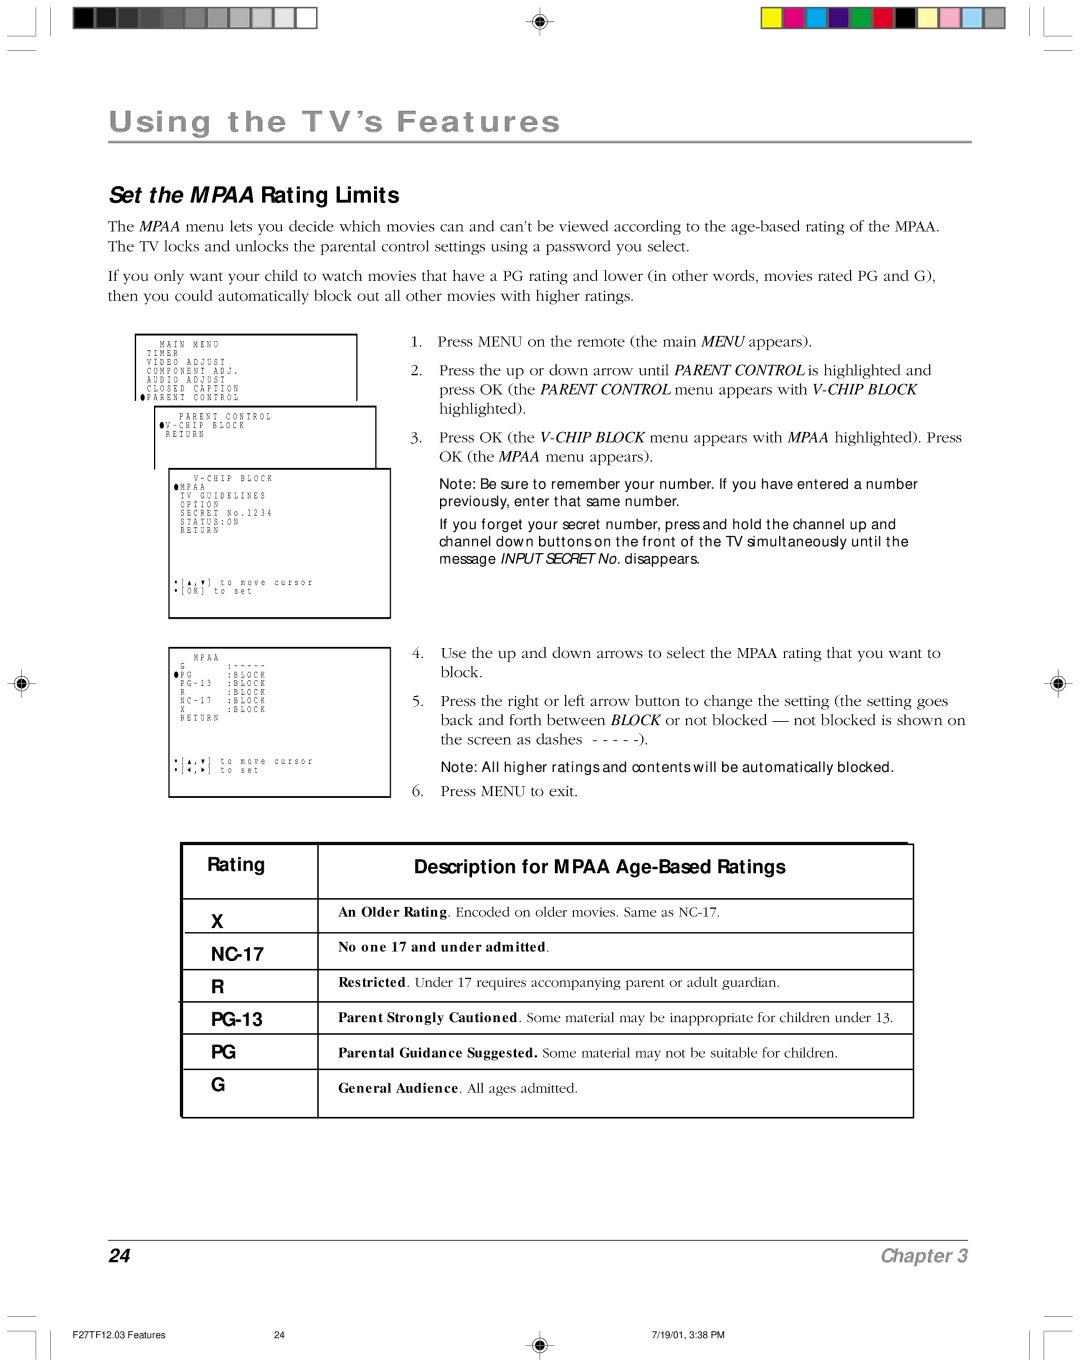 RCA F27TF12 manual Set the Mpaa Rating Limits, Rating Description for Mpaa Age-Based Ratings, NC-17, PG-13 